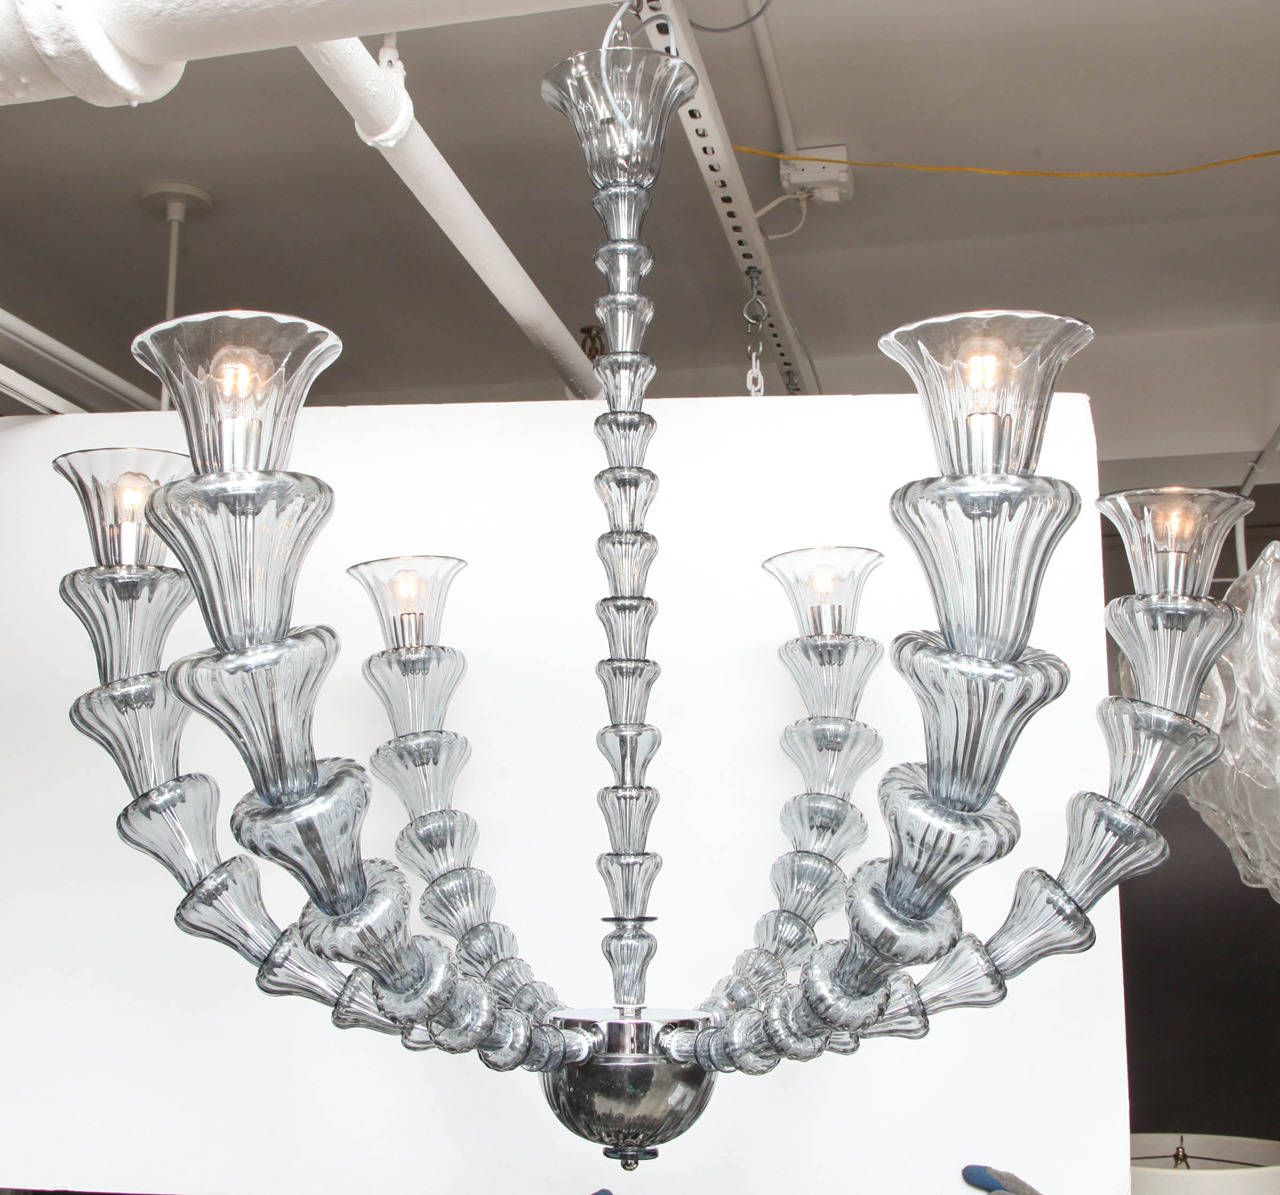 Very unique vintage silver or pewter gray Murano glass chandelier with six arms in the manner of Barovier and Toso. Individual handblown elements that surround each arm give this chandelier an organic feel and look.  Chrome frame.  Rewired for the